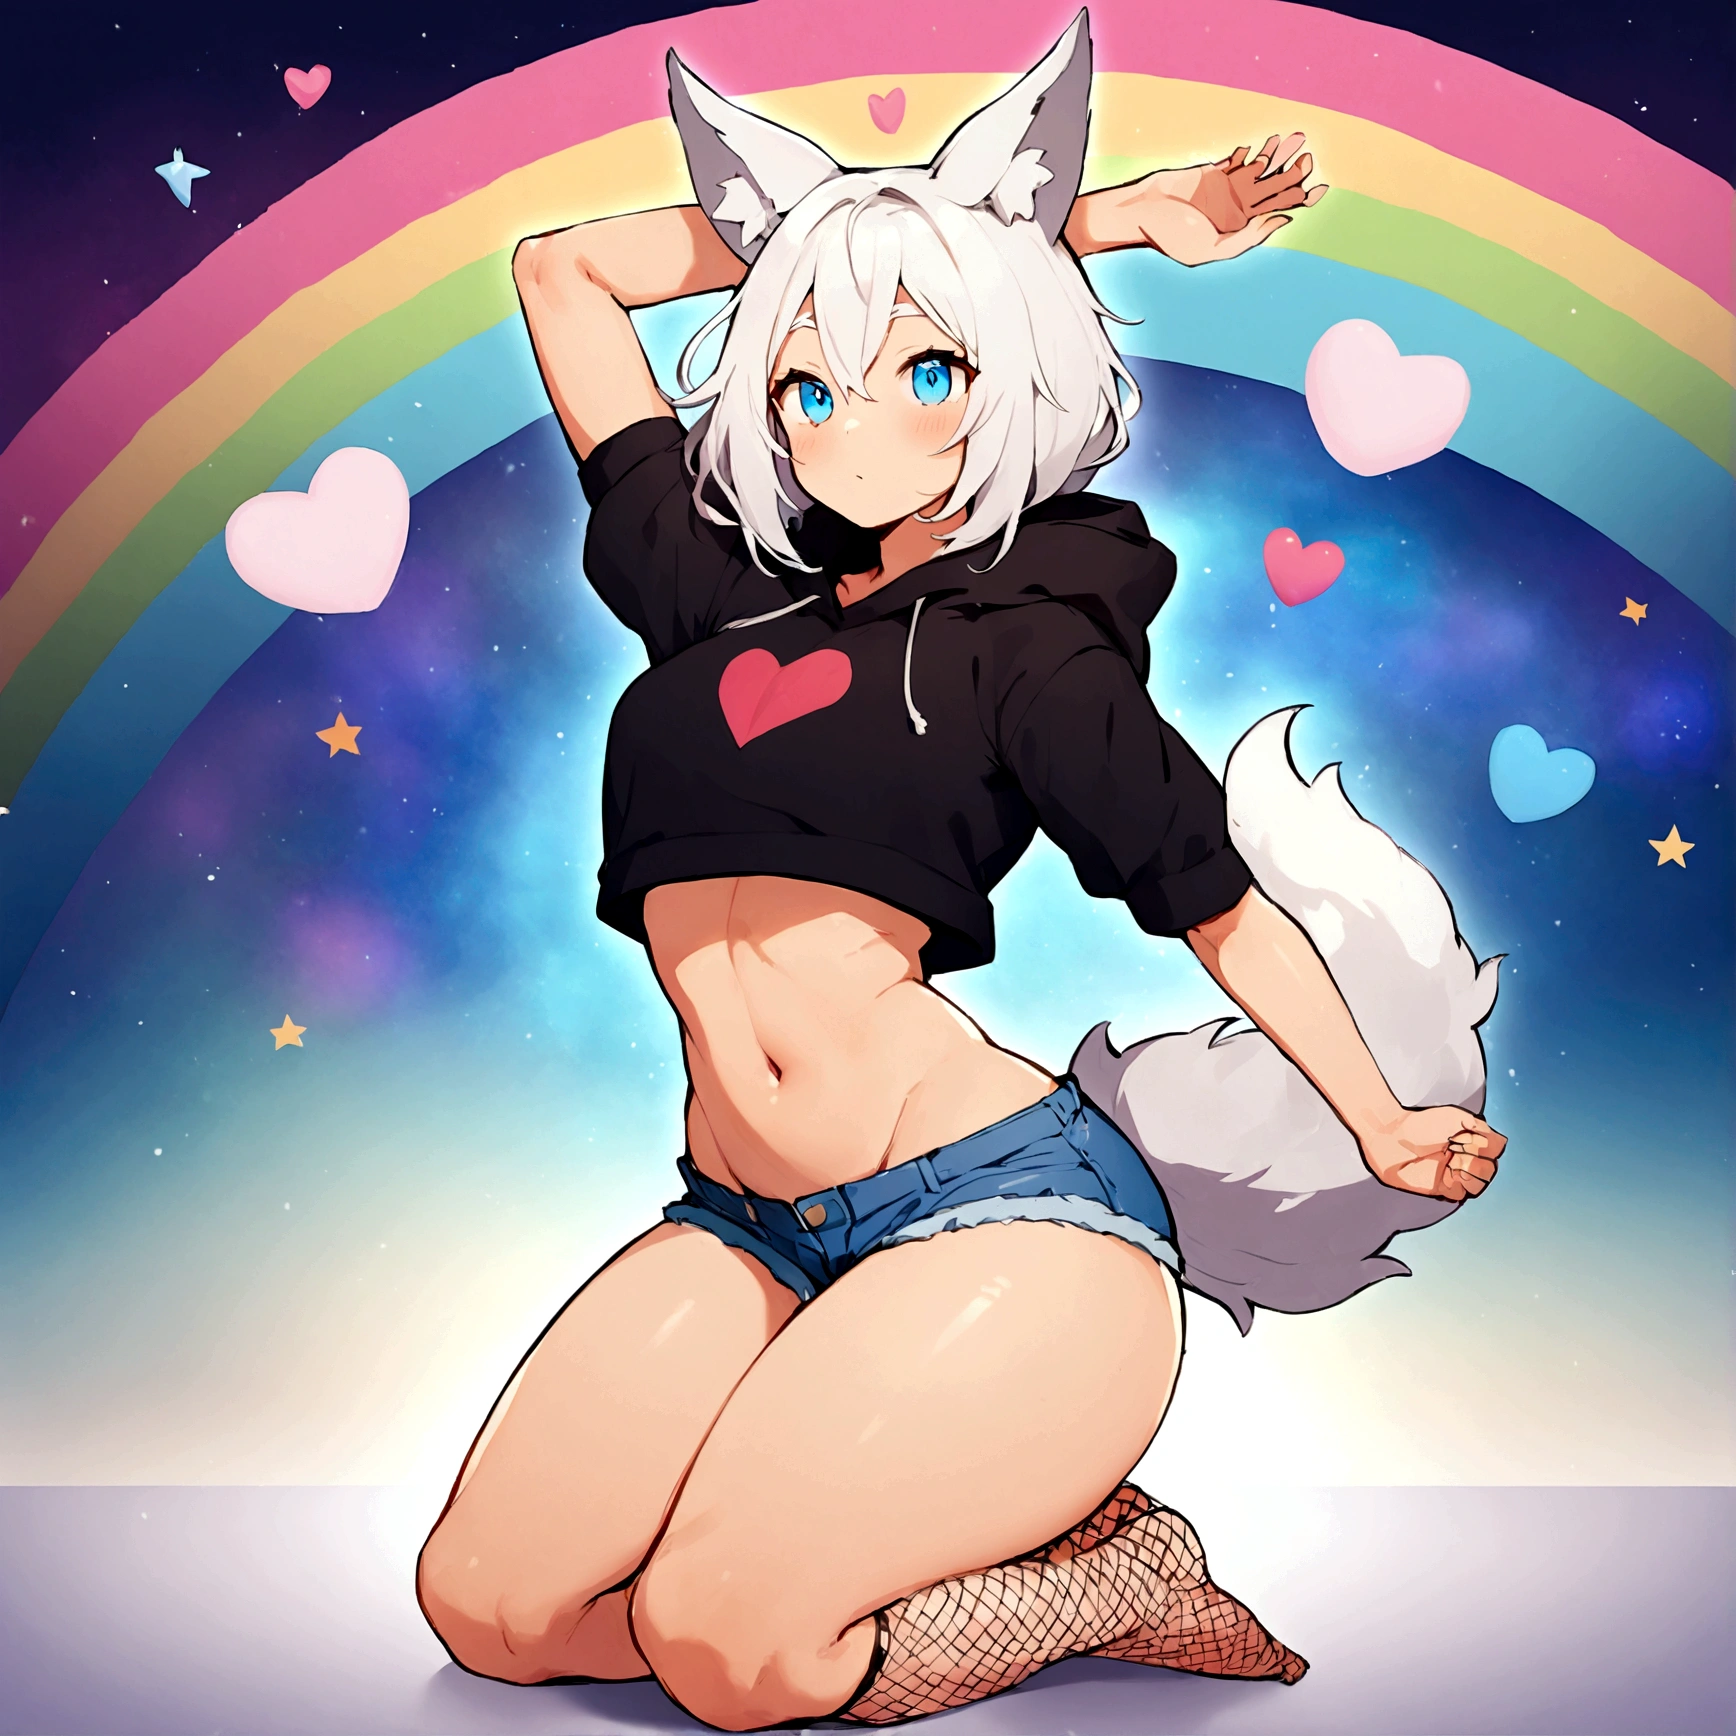 a cute adult male with wolf ears, white hair, has a wolf tail, wearing a loose cropped oversized black hoodie, wearing a pair of denim short shorts and fishnet stockings, thick thighs, wide hips, relaxing on mound of fluffy multi colored kawaii plushies, short, very slim, showing slender tummy, stretching out, heart on hoodie, squishy thighs, has glowing blue eyes. alone, solo (ALONE)(SOLO), surrounded by rainbows, colorful galaxy backround